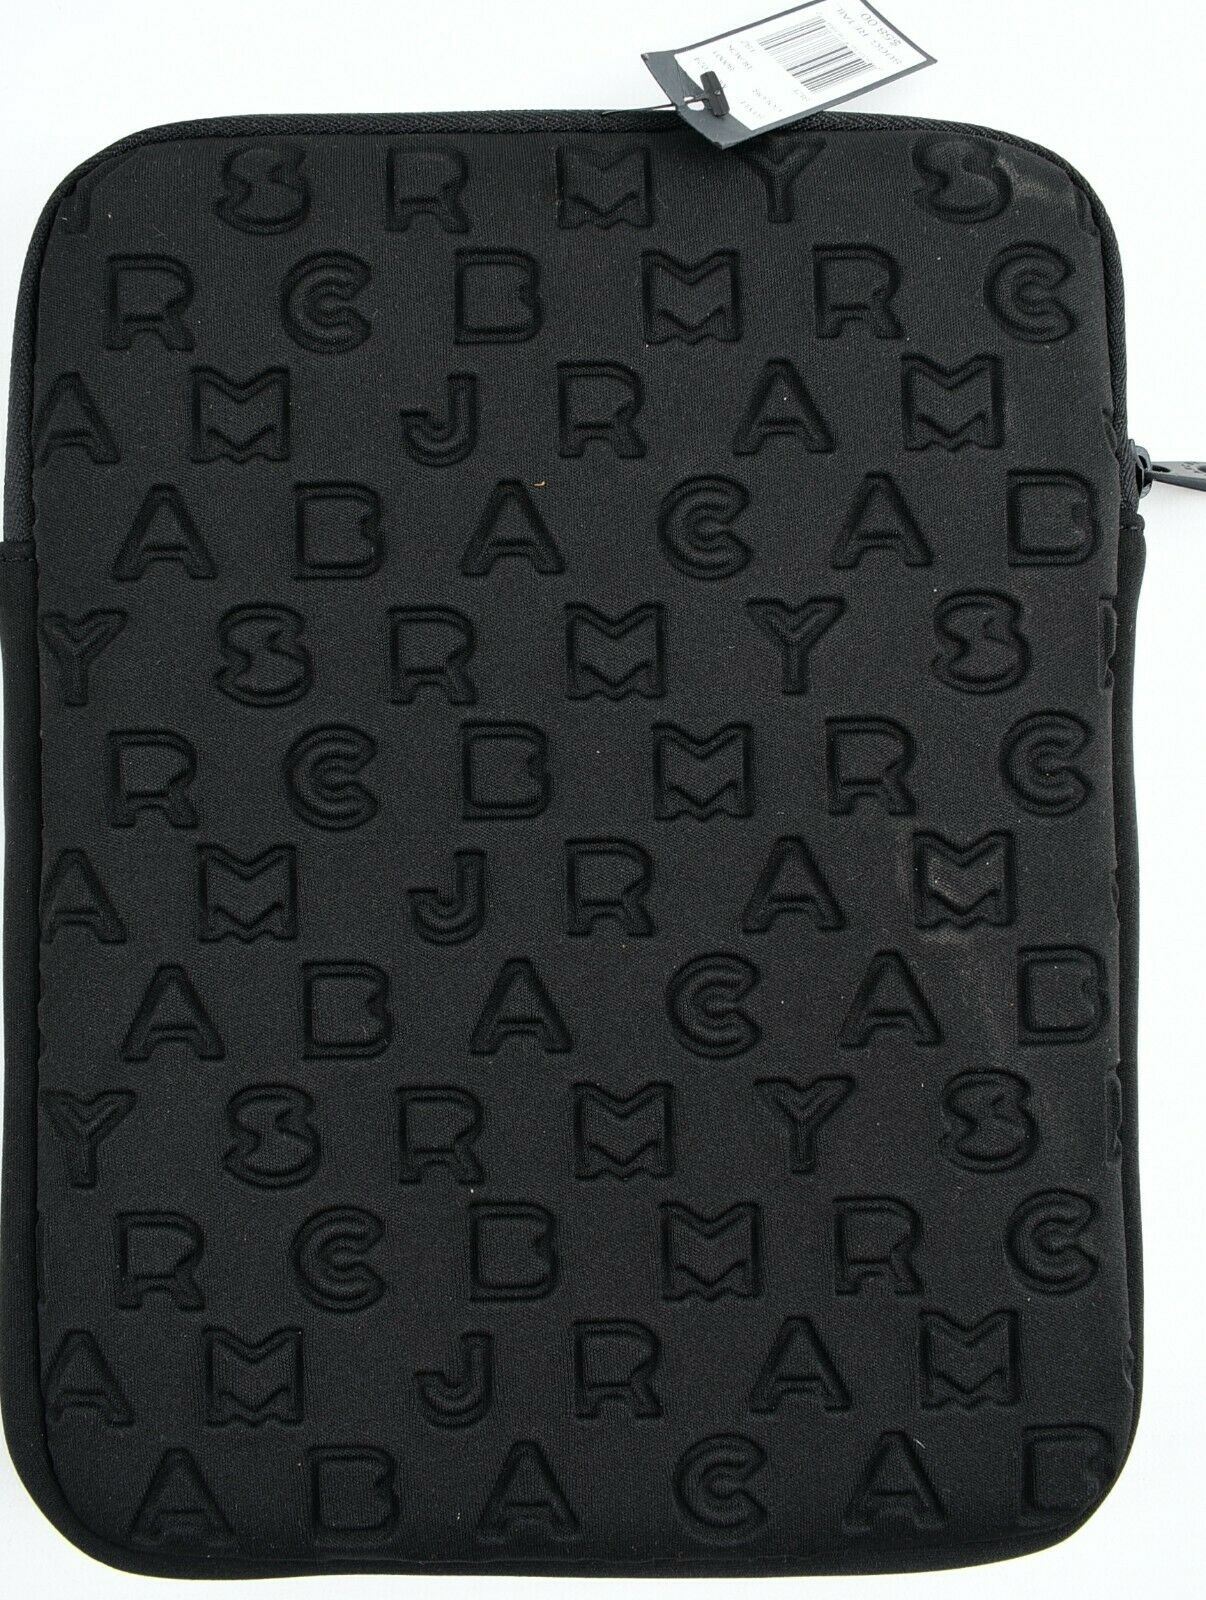 MARC by MARC JACOBS Zip Around Padded iPad Tablet Case, Black